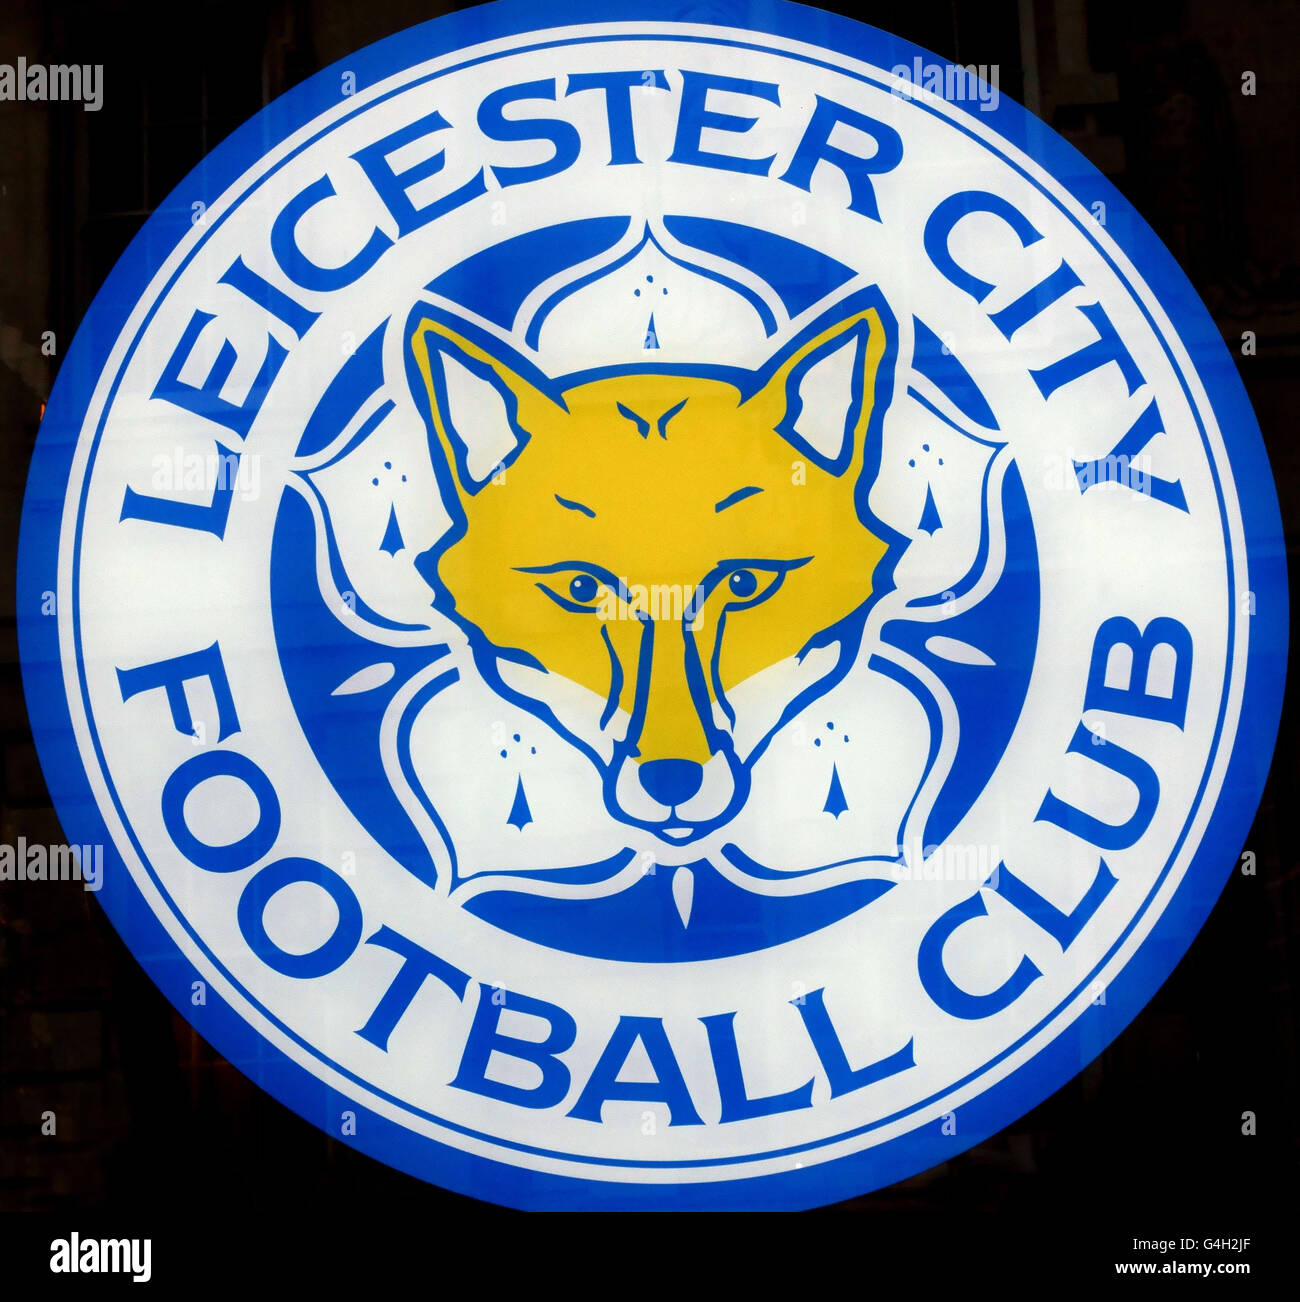 Logo of Leicester City Football Club, Premiership Champions 2015-2016,  Leicester, England Stock Photo - Alamy